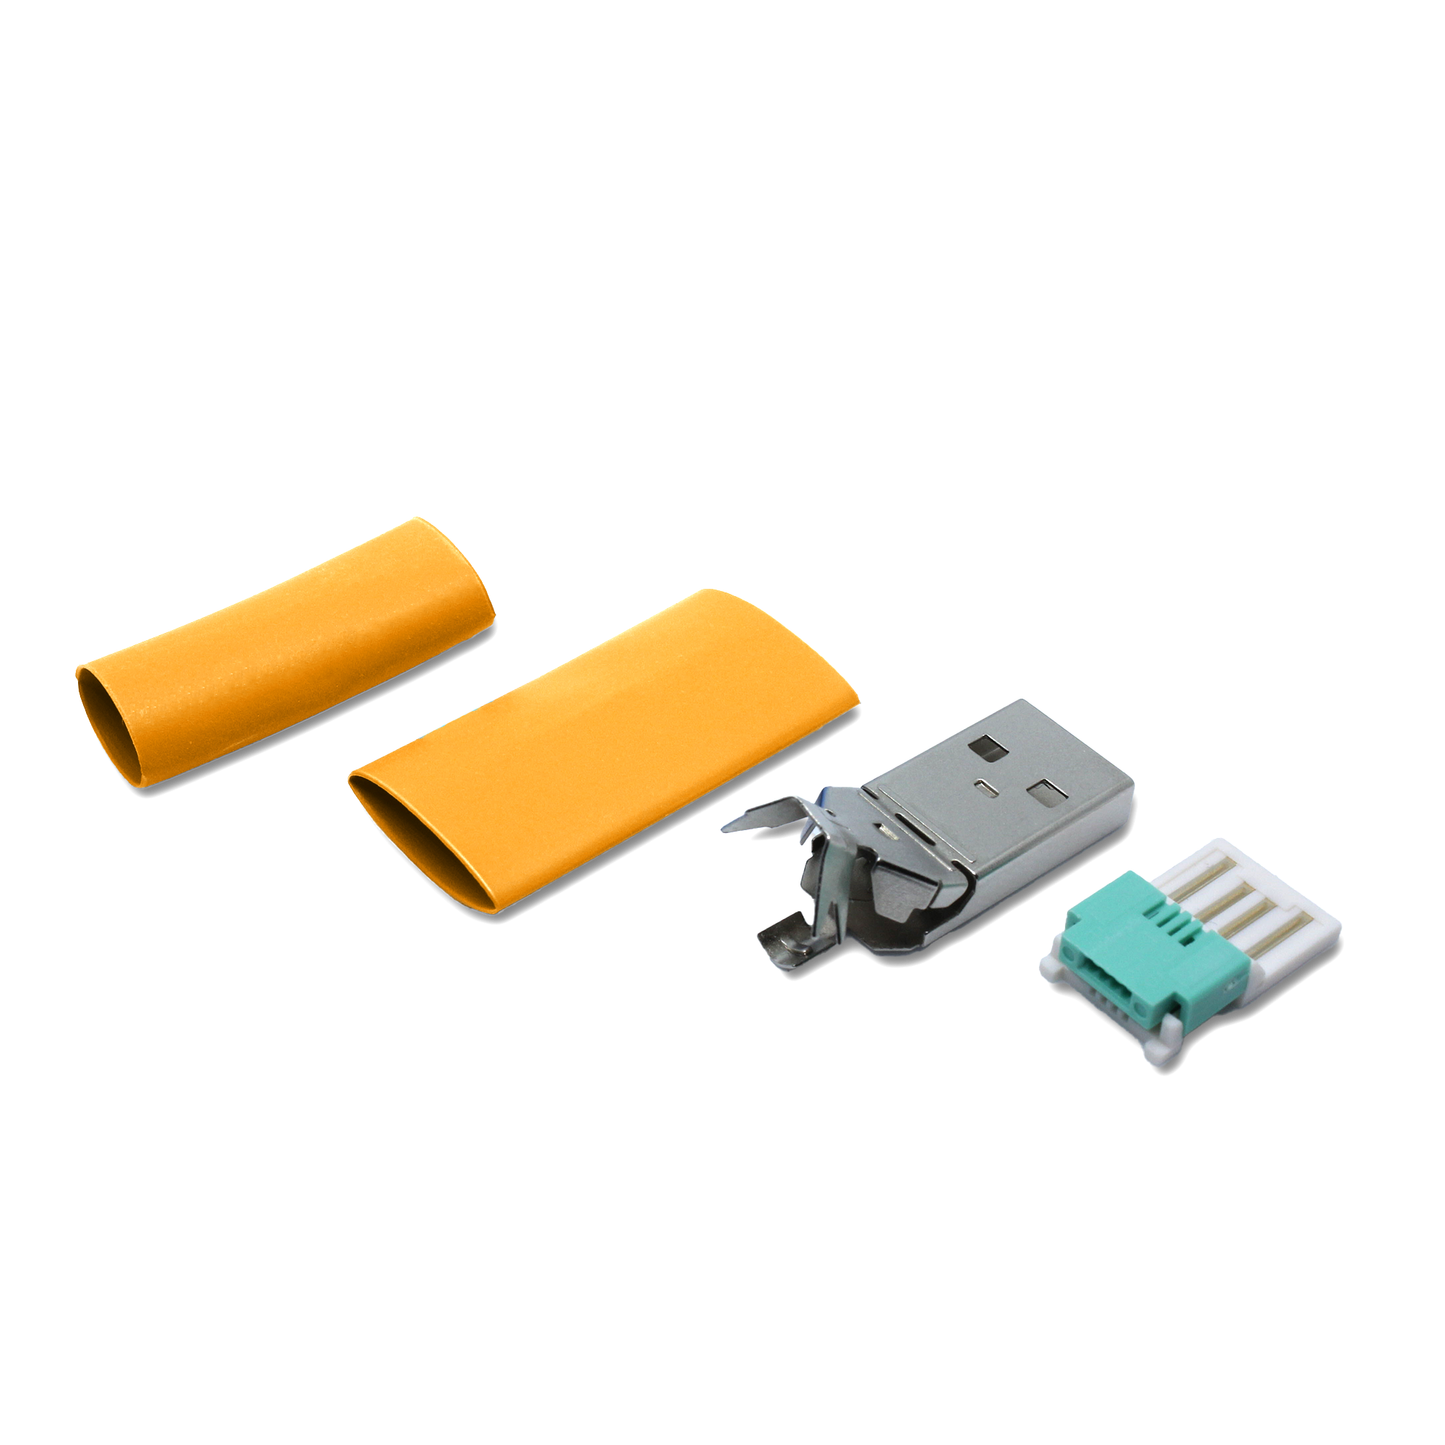 USB A plug orange in single parts, with additional small heat shrink tube for repair (solderless/crimp) of thin USB 2.0 cables